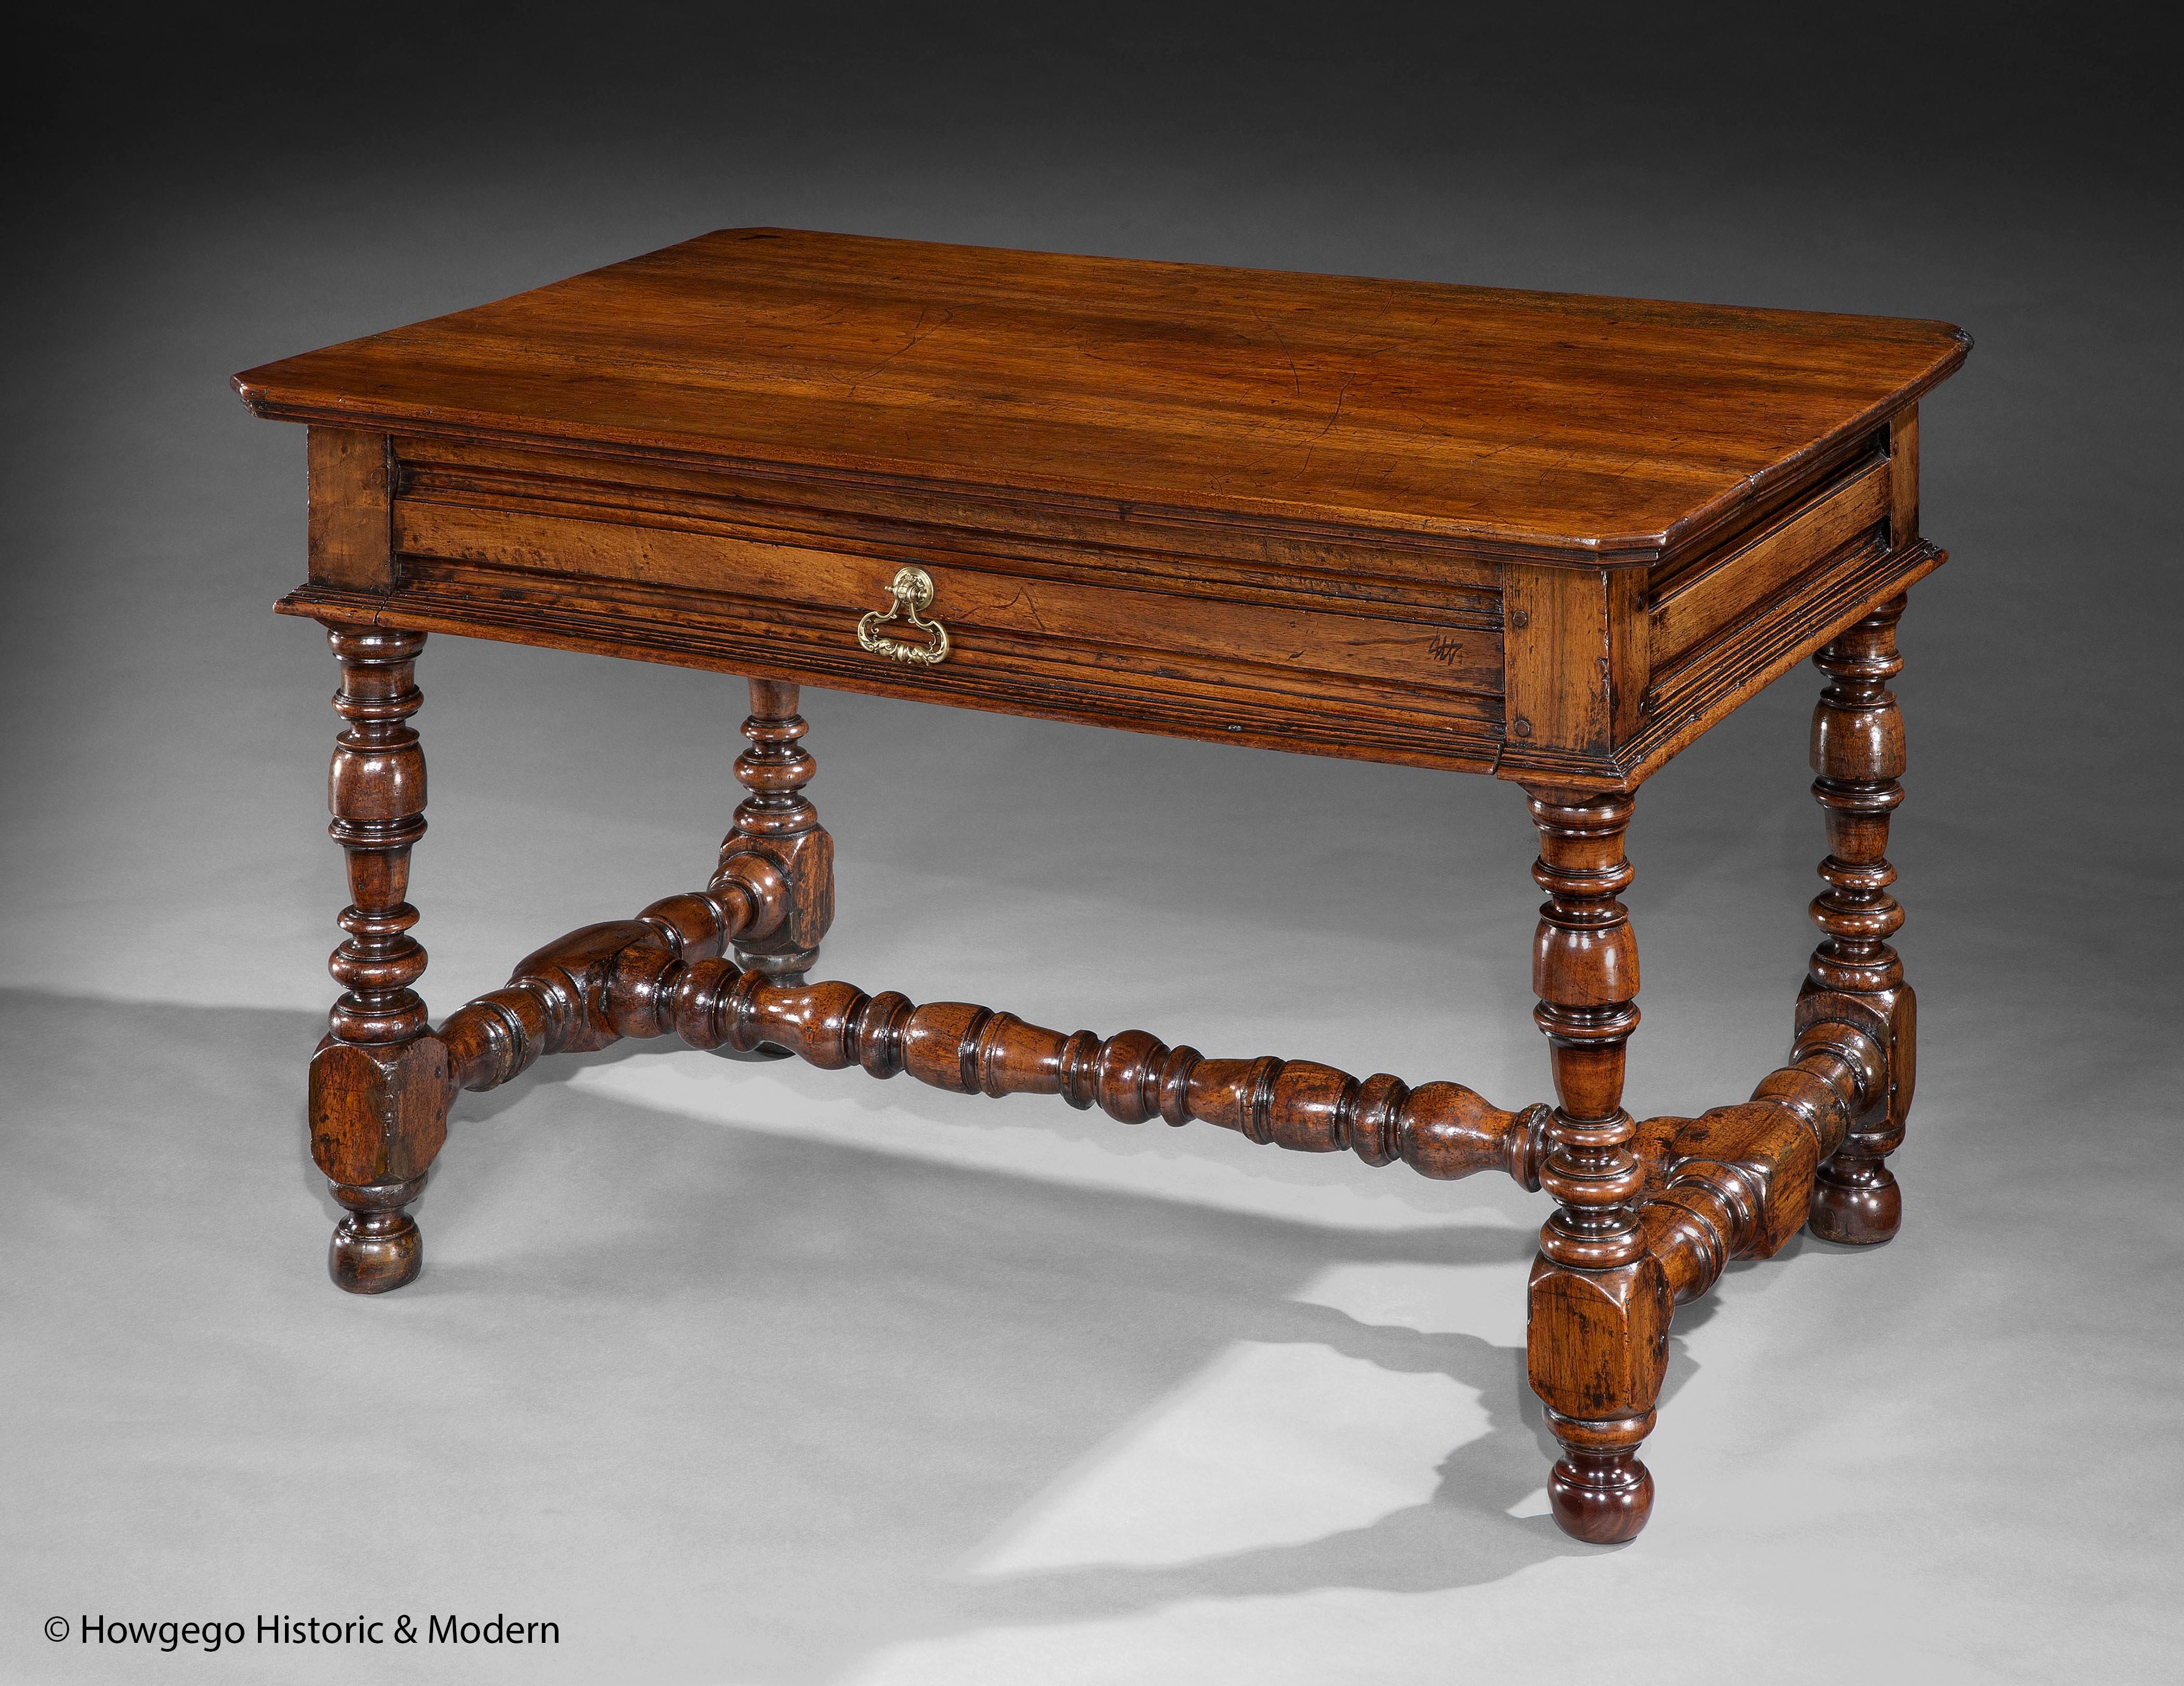 Unusally Large Italian Walnut Centre, Occassional or Writing Table, Genoa

Unusual large size with classical elegance and form
Conceived as a center table as the frieze decoration is front back and sides
Rare brass handle with a pair of